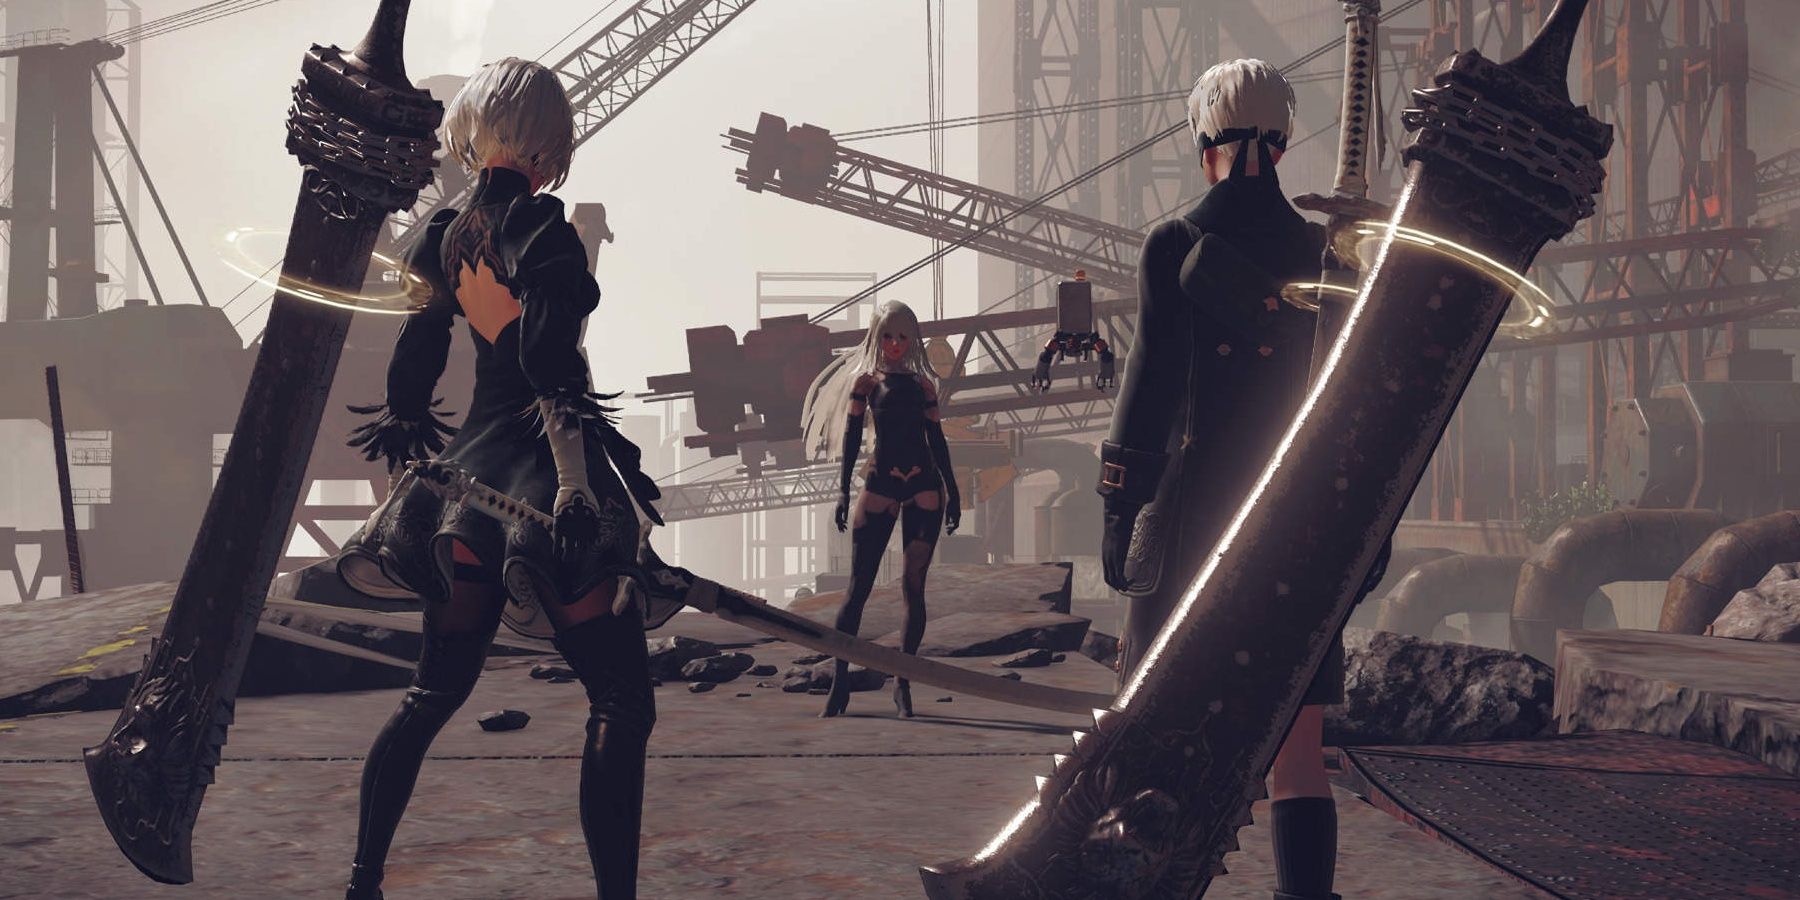 NieR: Automata - 2B and 9S standing off with A2